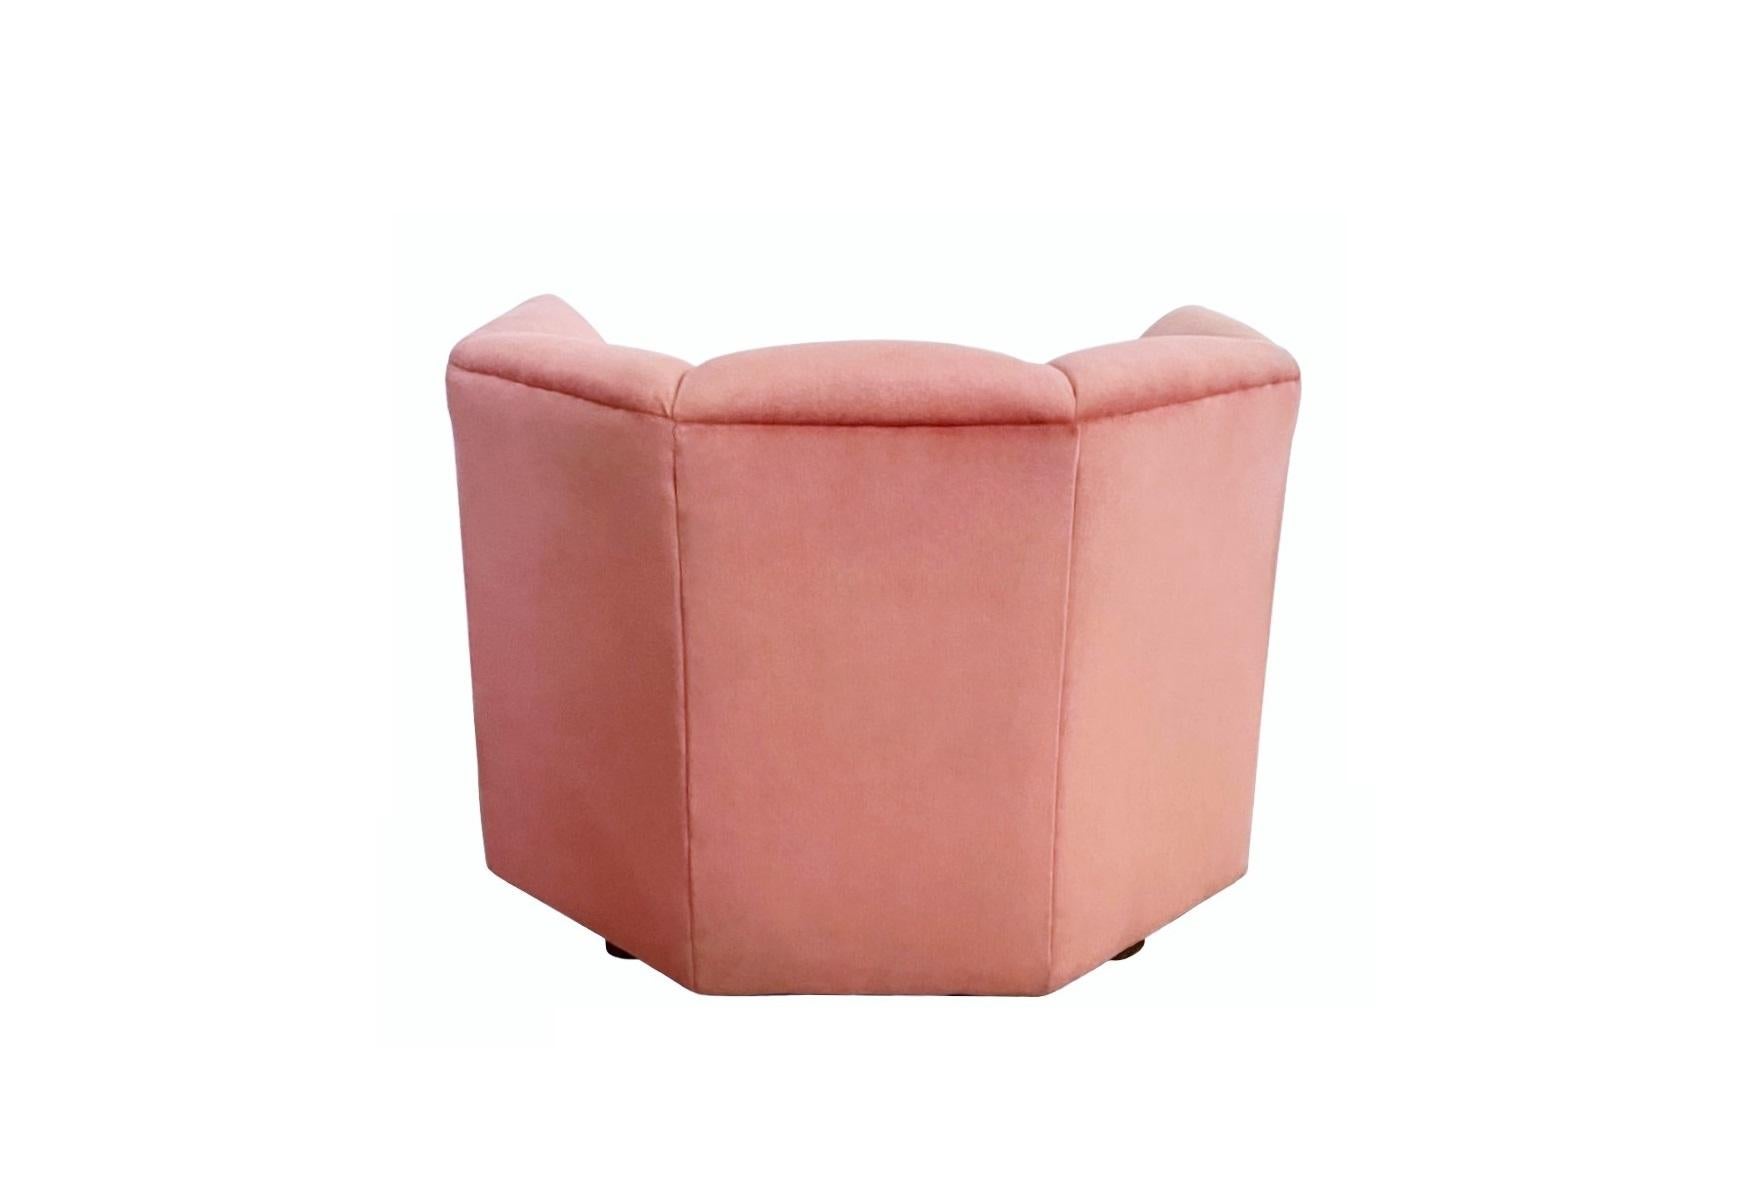 1970s Hexagonal Club Chairs in a Dusty Rose Velvet For Sale 7